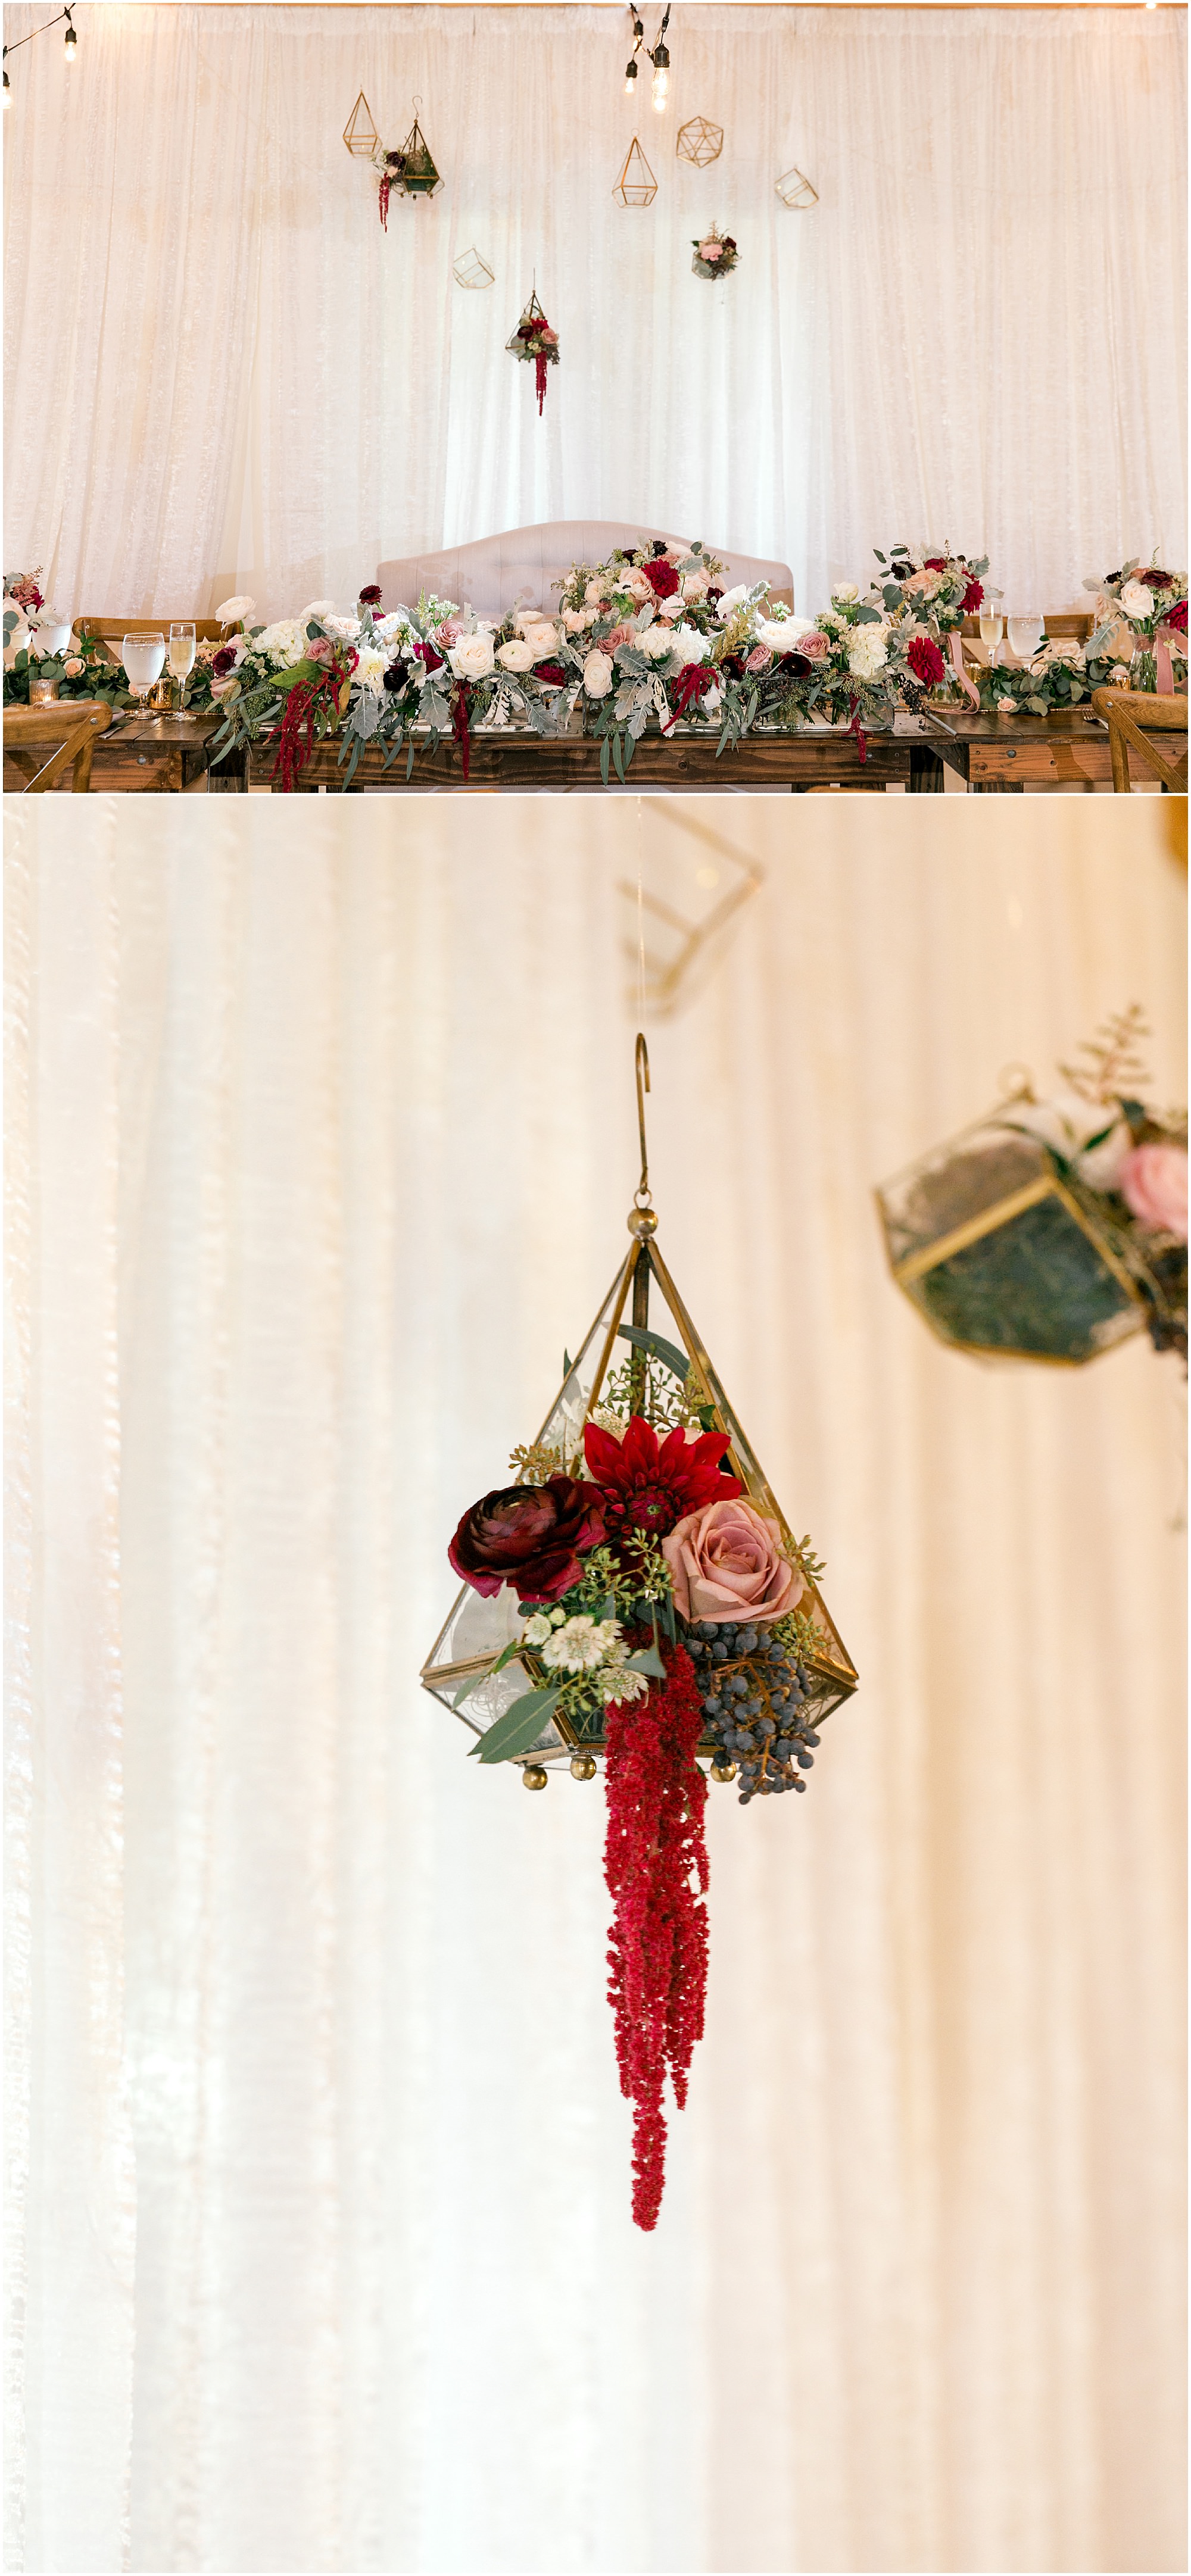 Dusty rose and burgundy wedding sweetheart table with floral decor hanging above